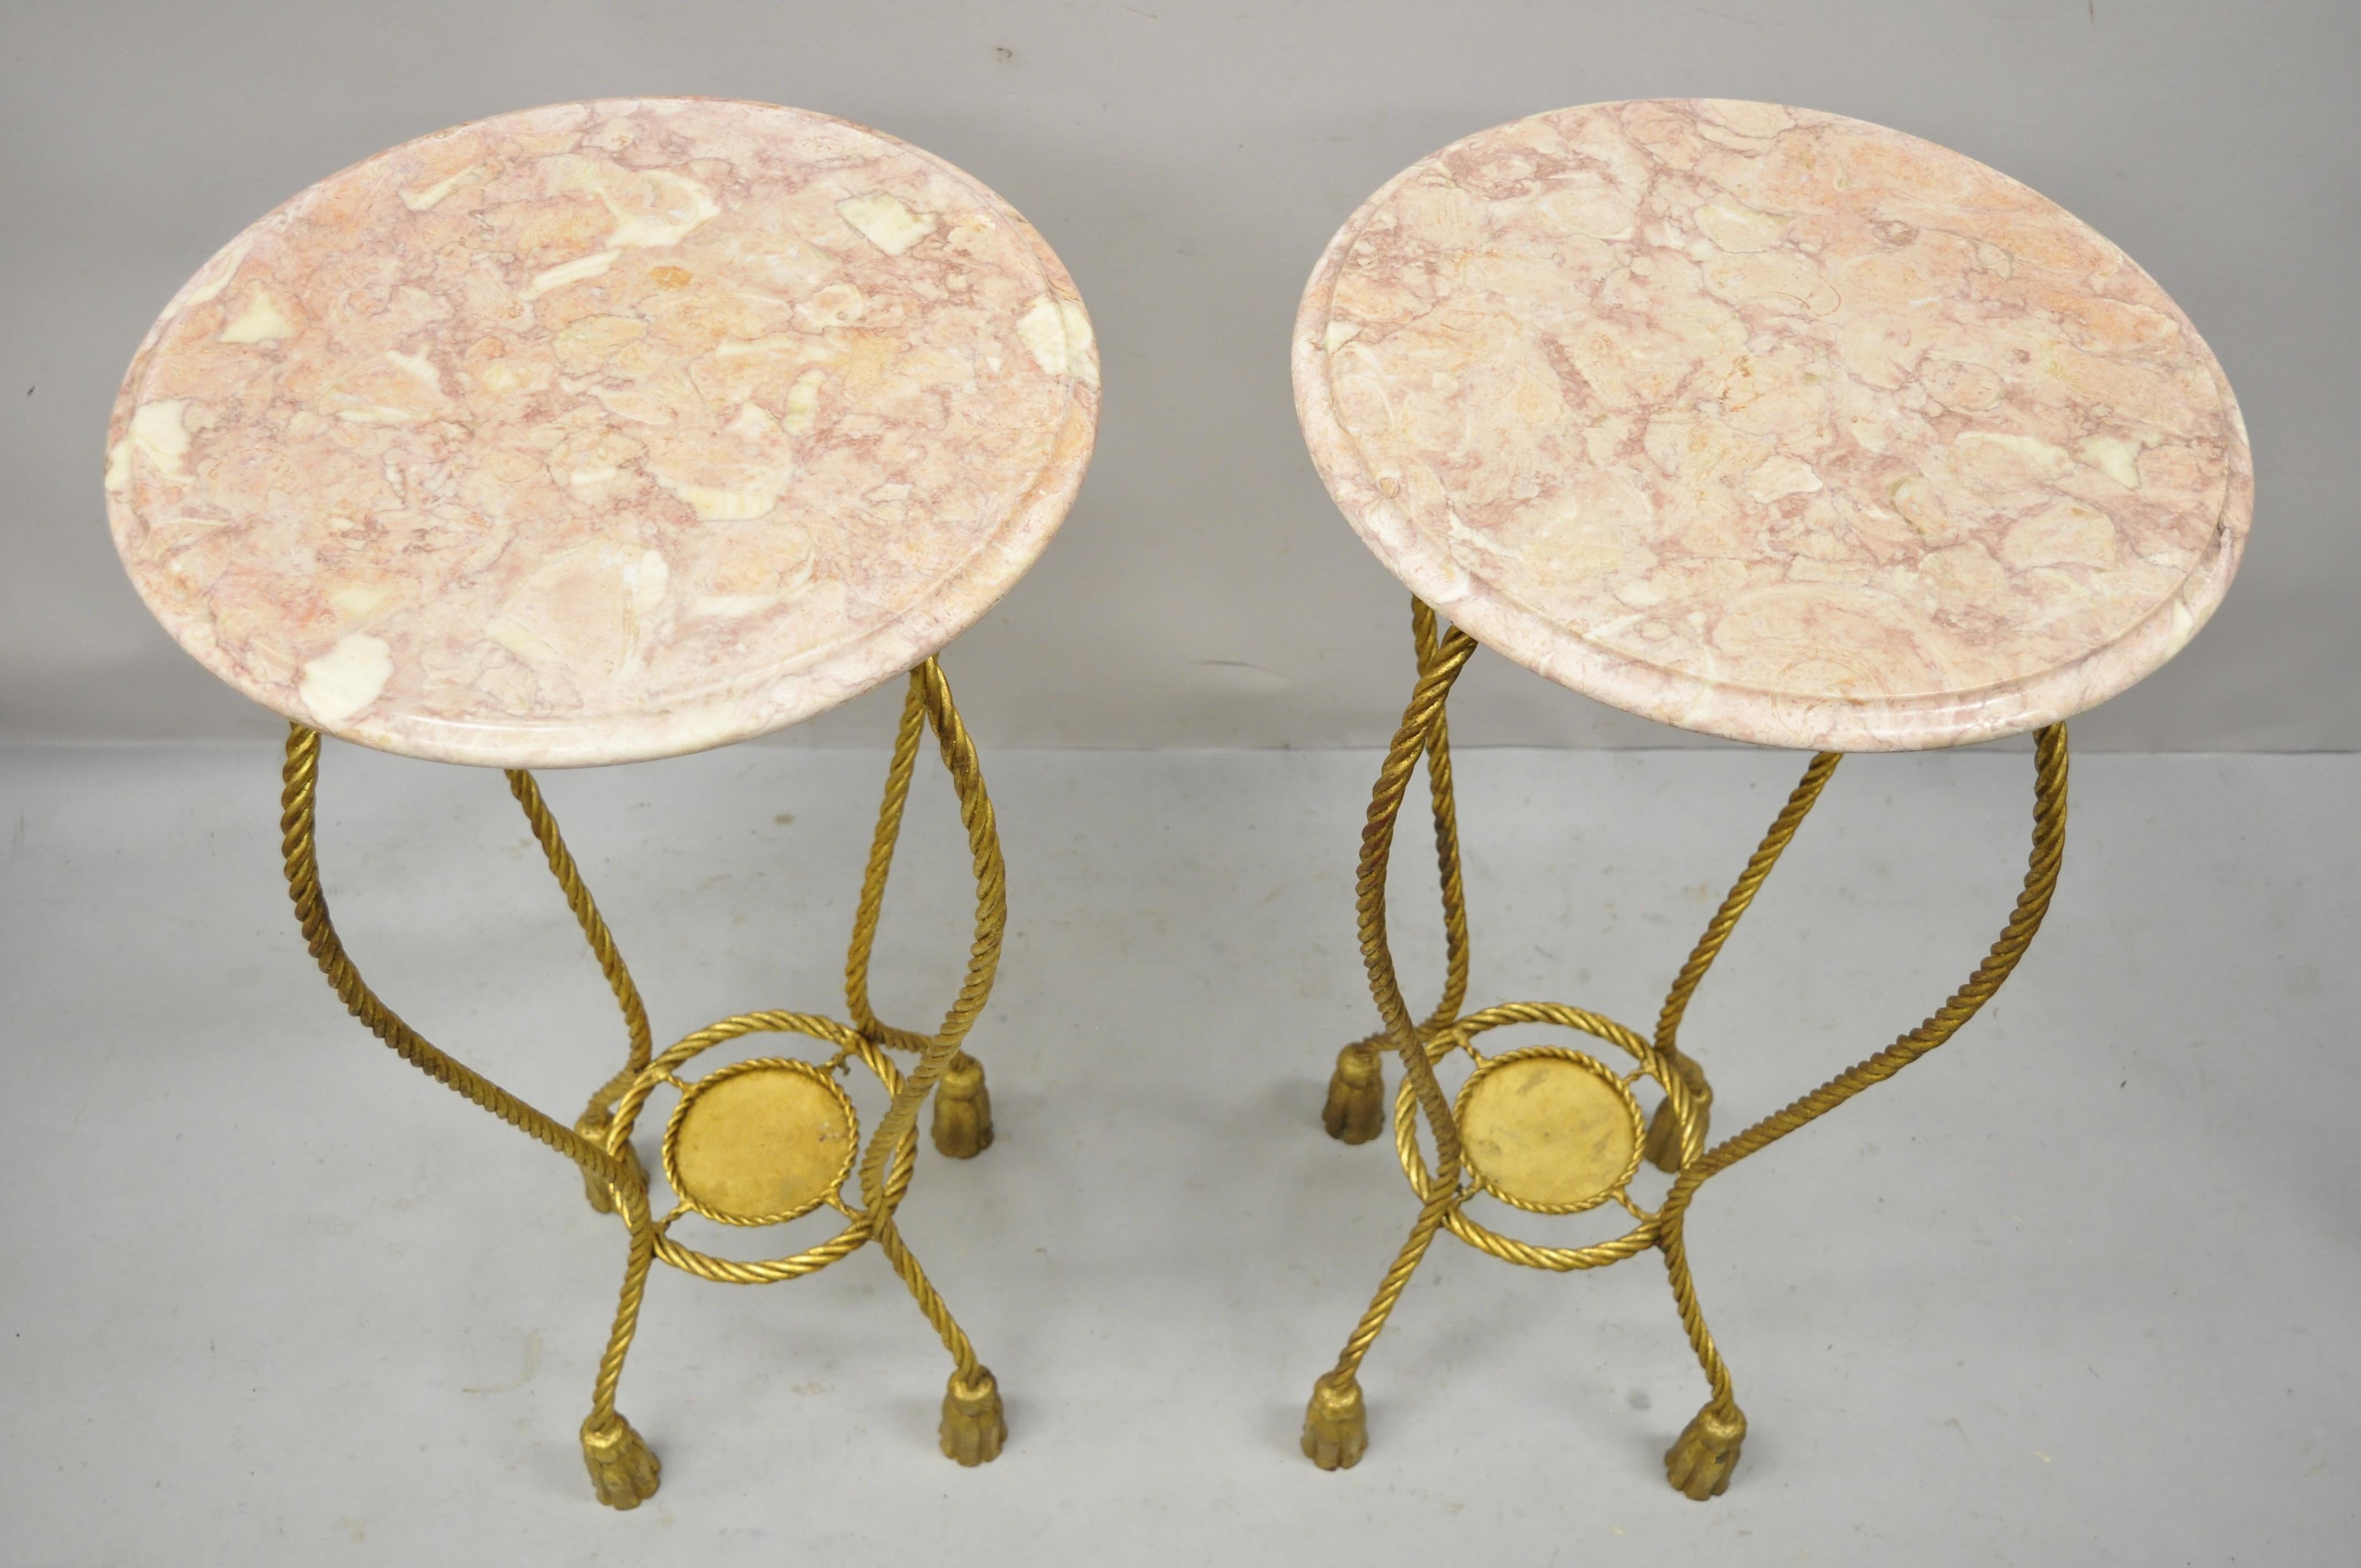 Italian gold gilt iron rope tassel marble top tall pedestal plant stand - a Pair. Item features pink round marble tops, gold gilt iron rope and tassel tall bases, original Italian tags, very nice vintage pair, quality Italian craftsmanship. Circa